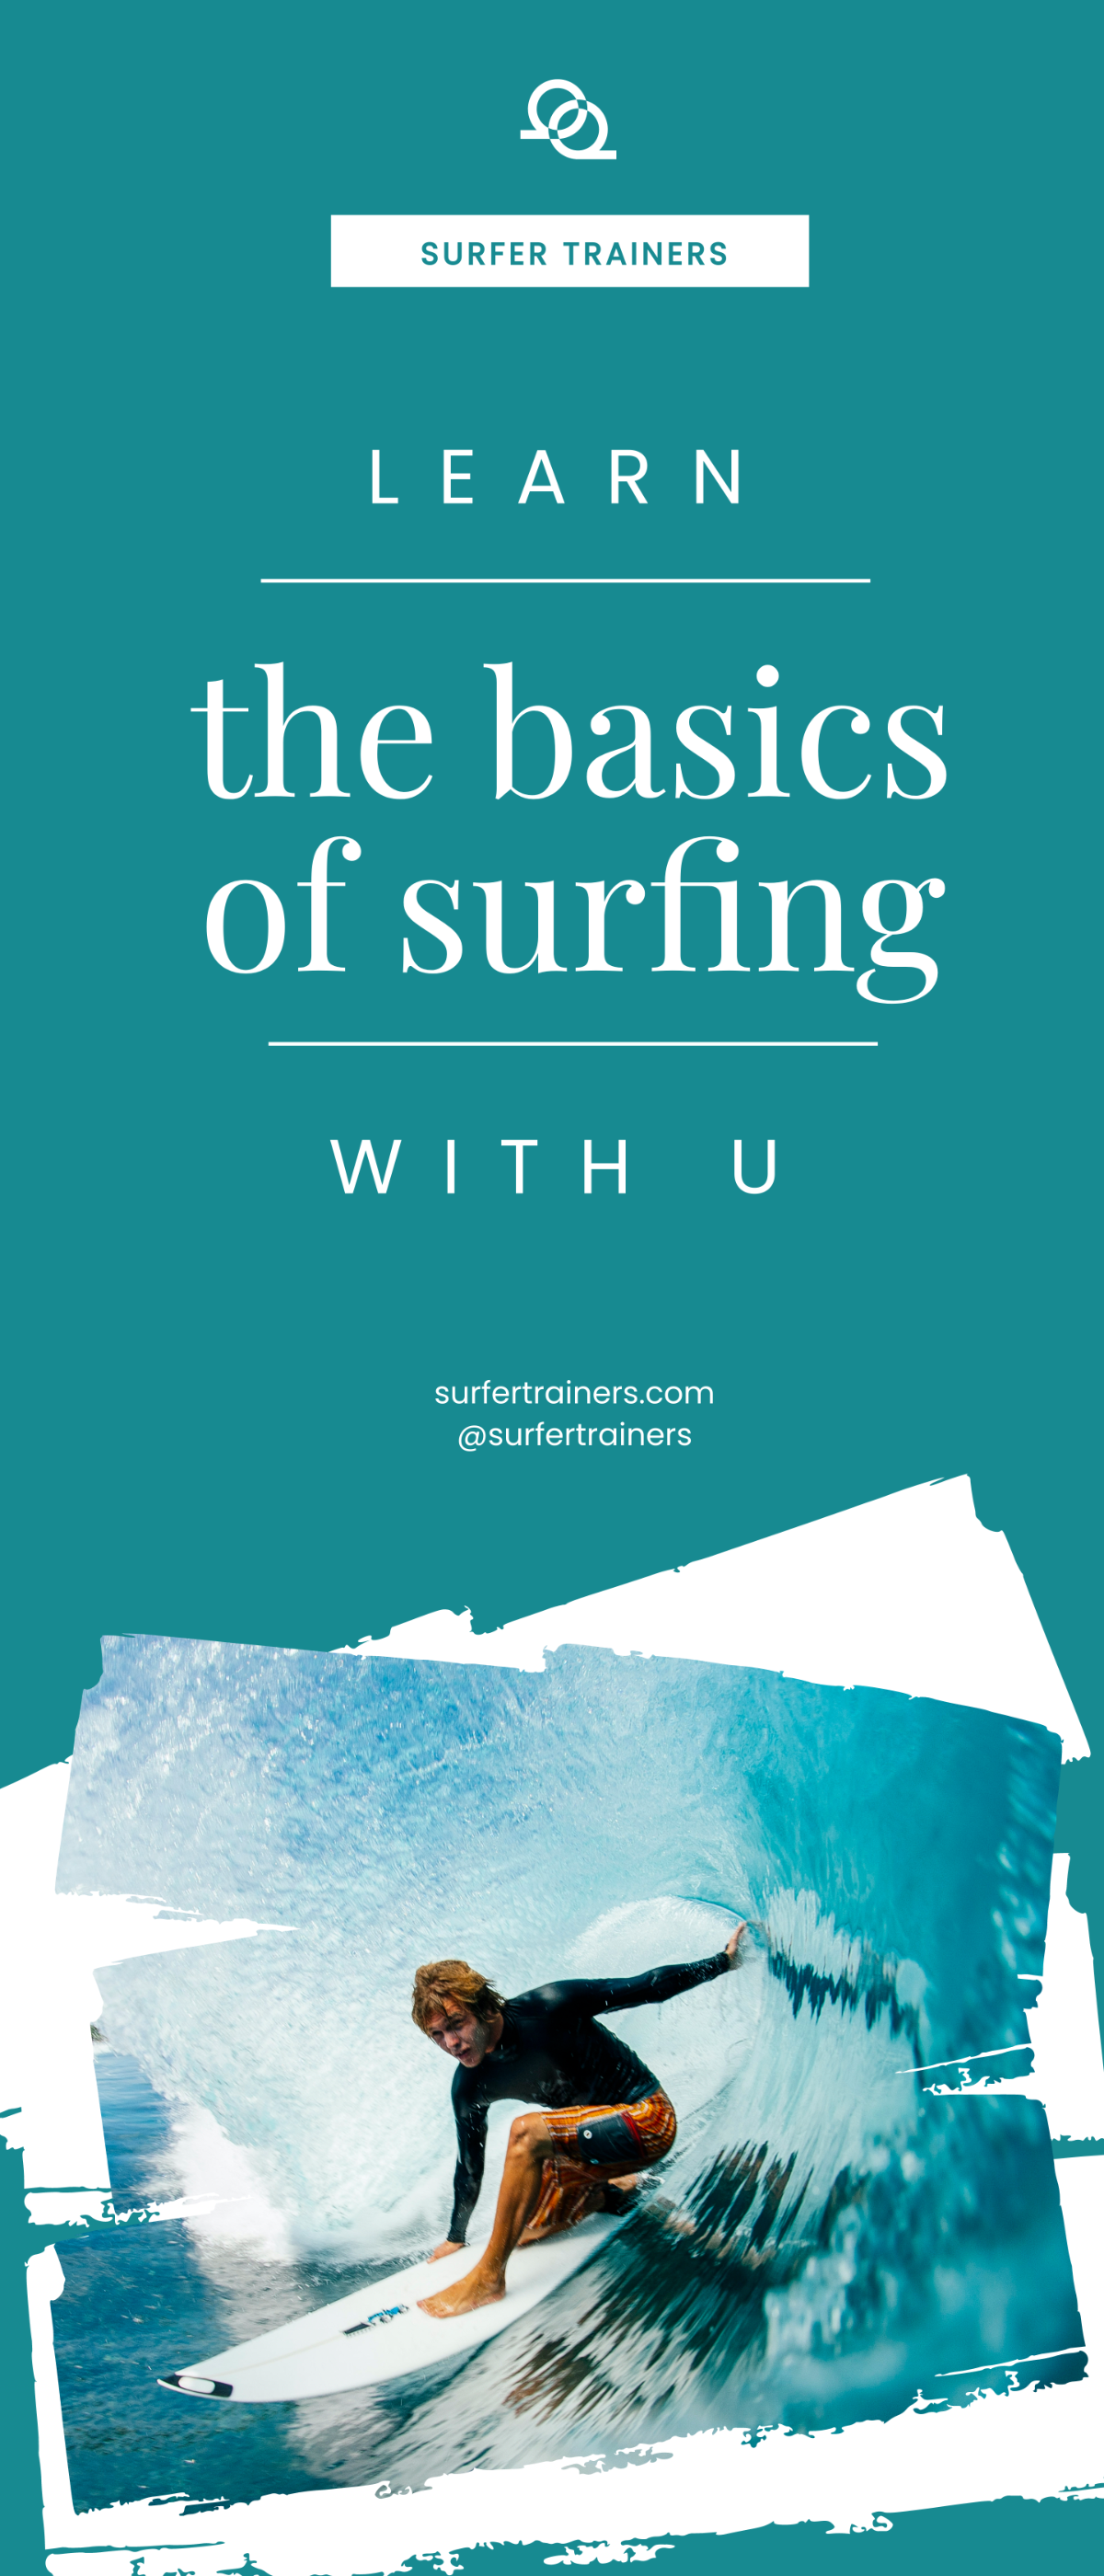 Surf Training Roll Up Banner